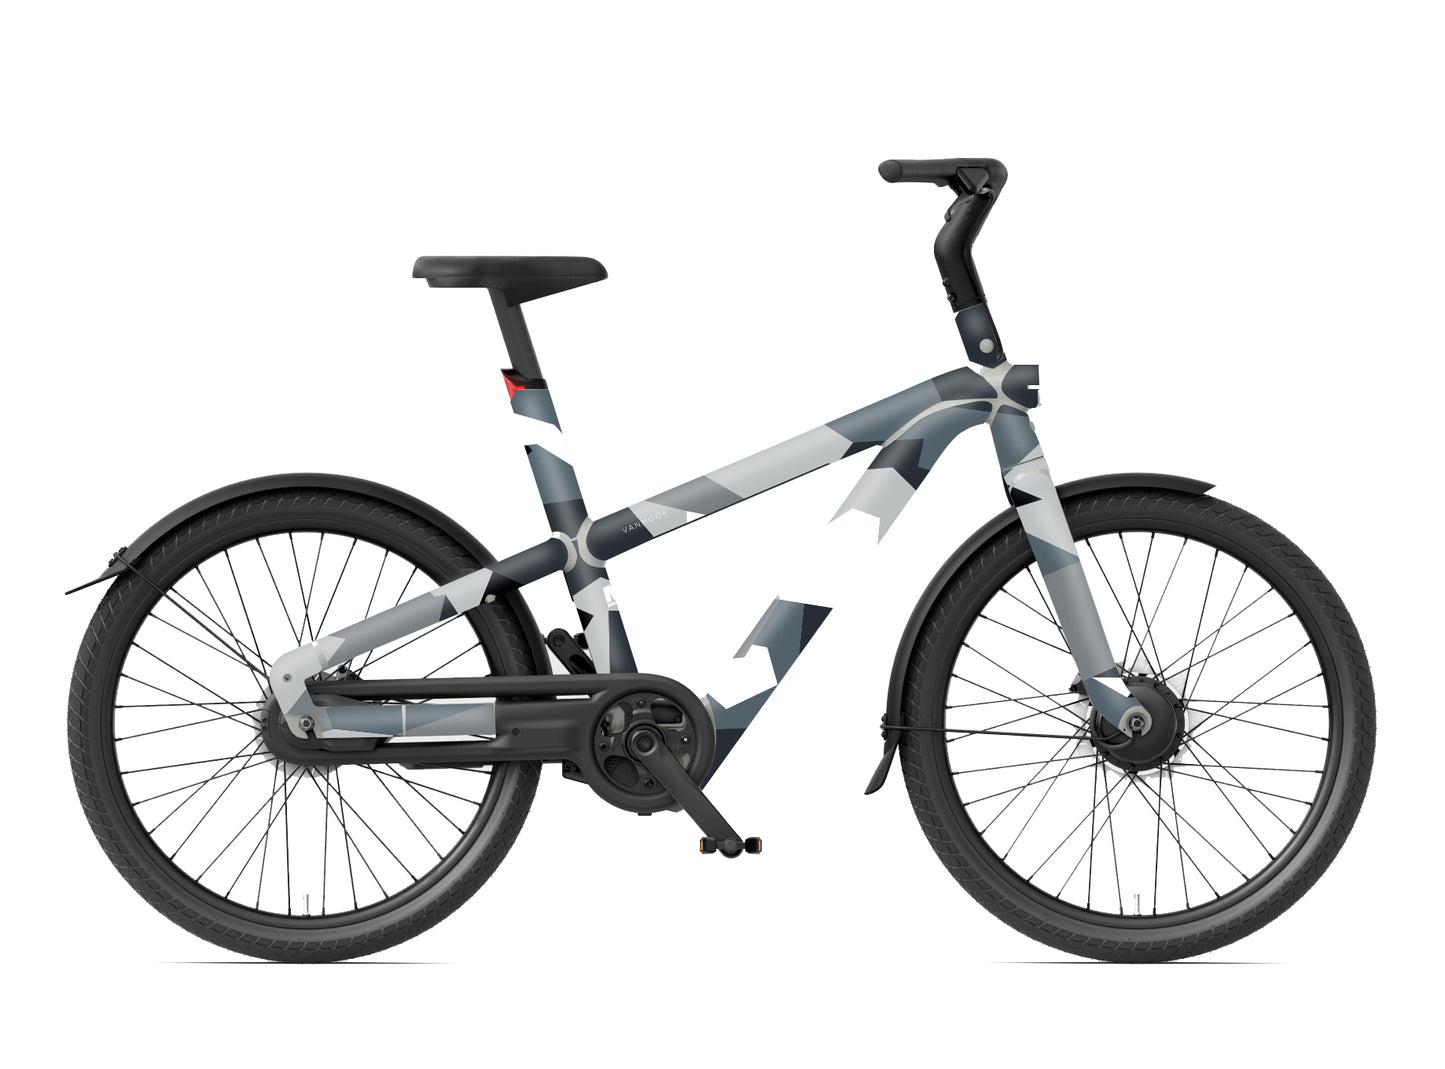 GREY CAMO PROTECT KIT FOR VANMOOF A5